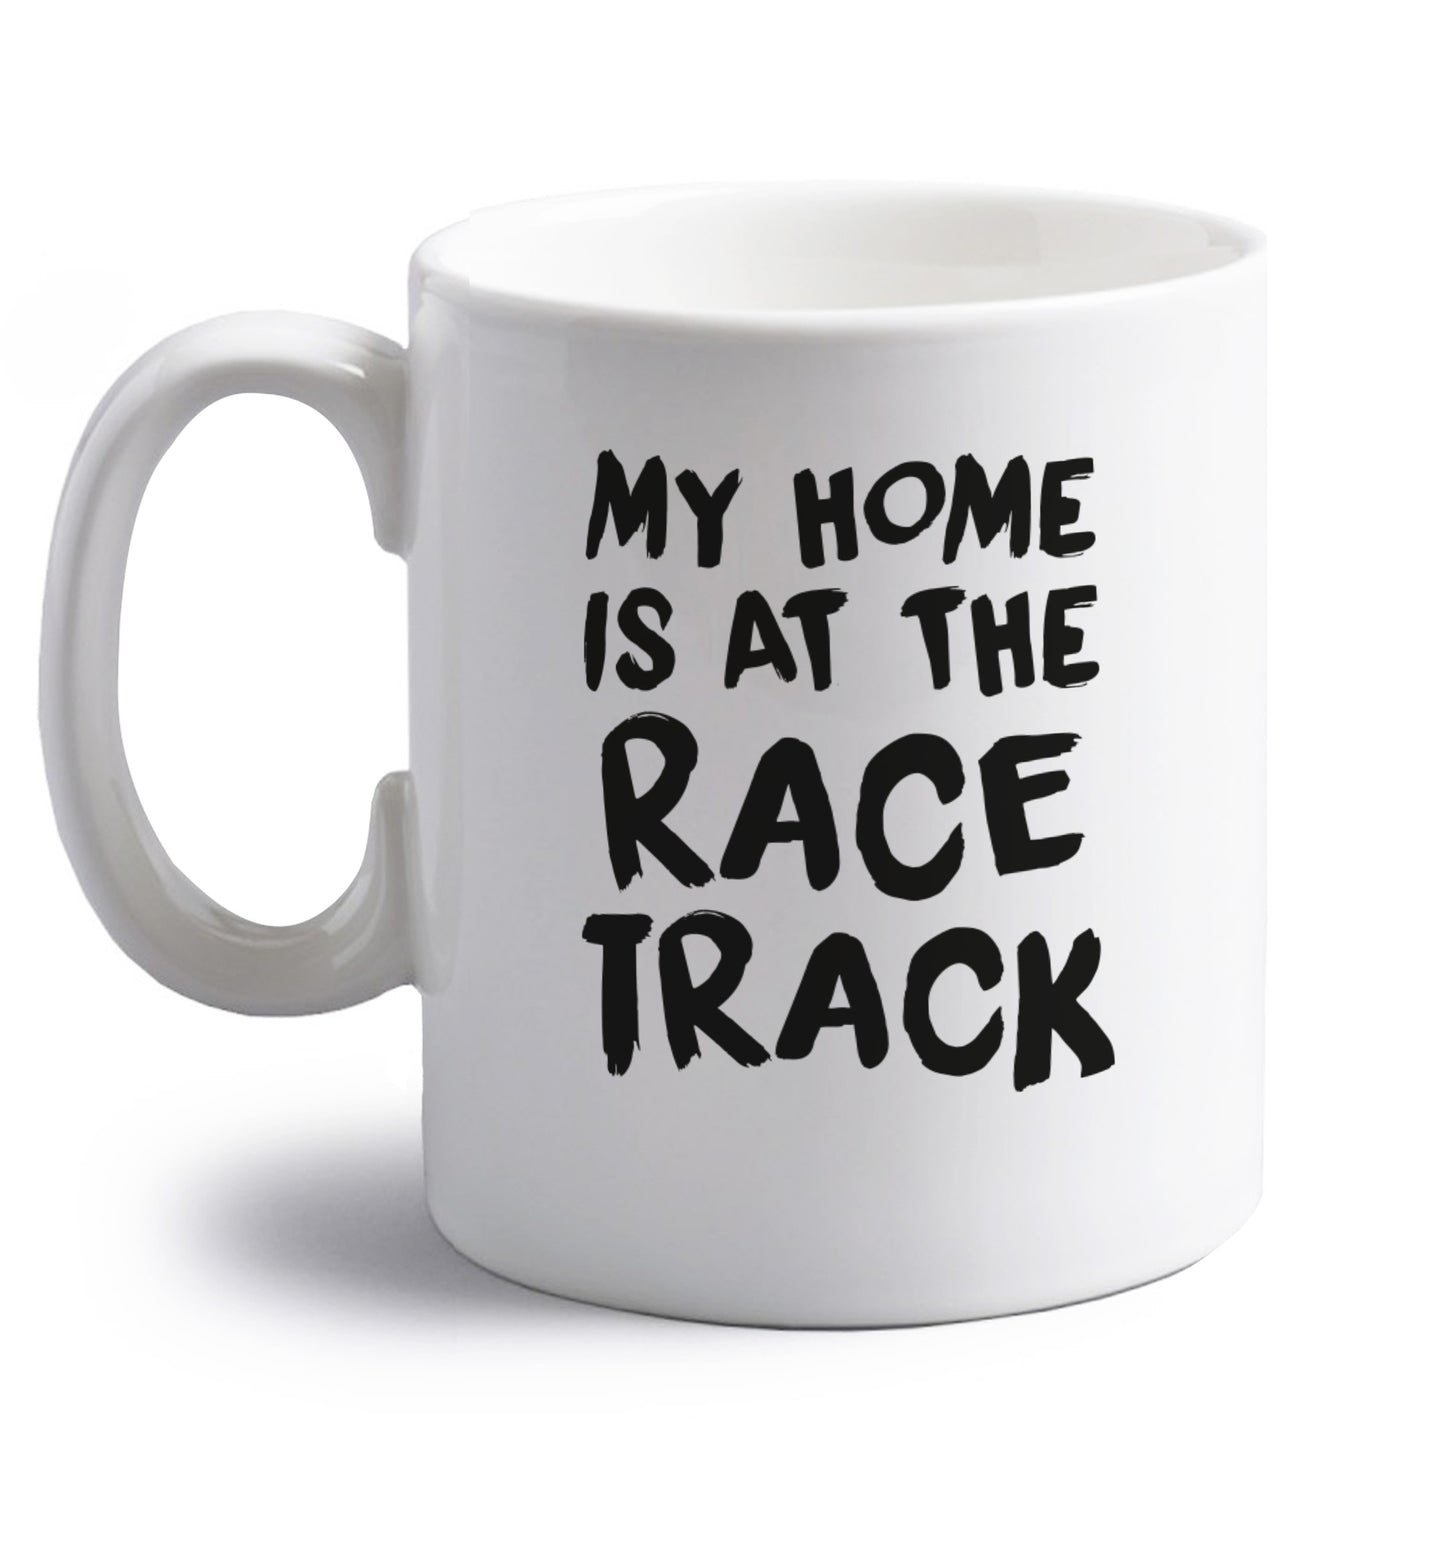 My home is at the race track right handed white ceramic mug 